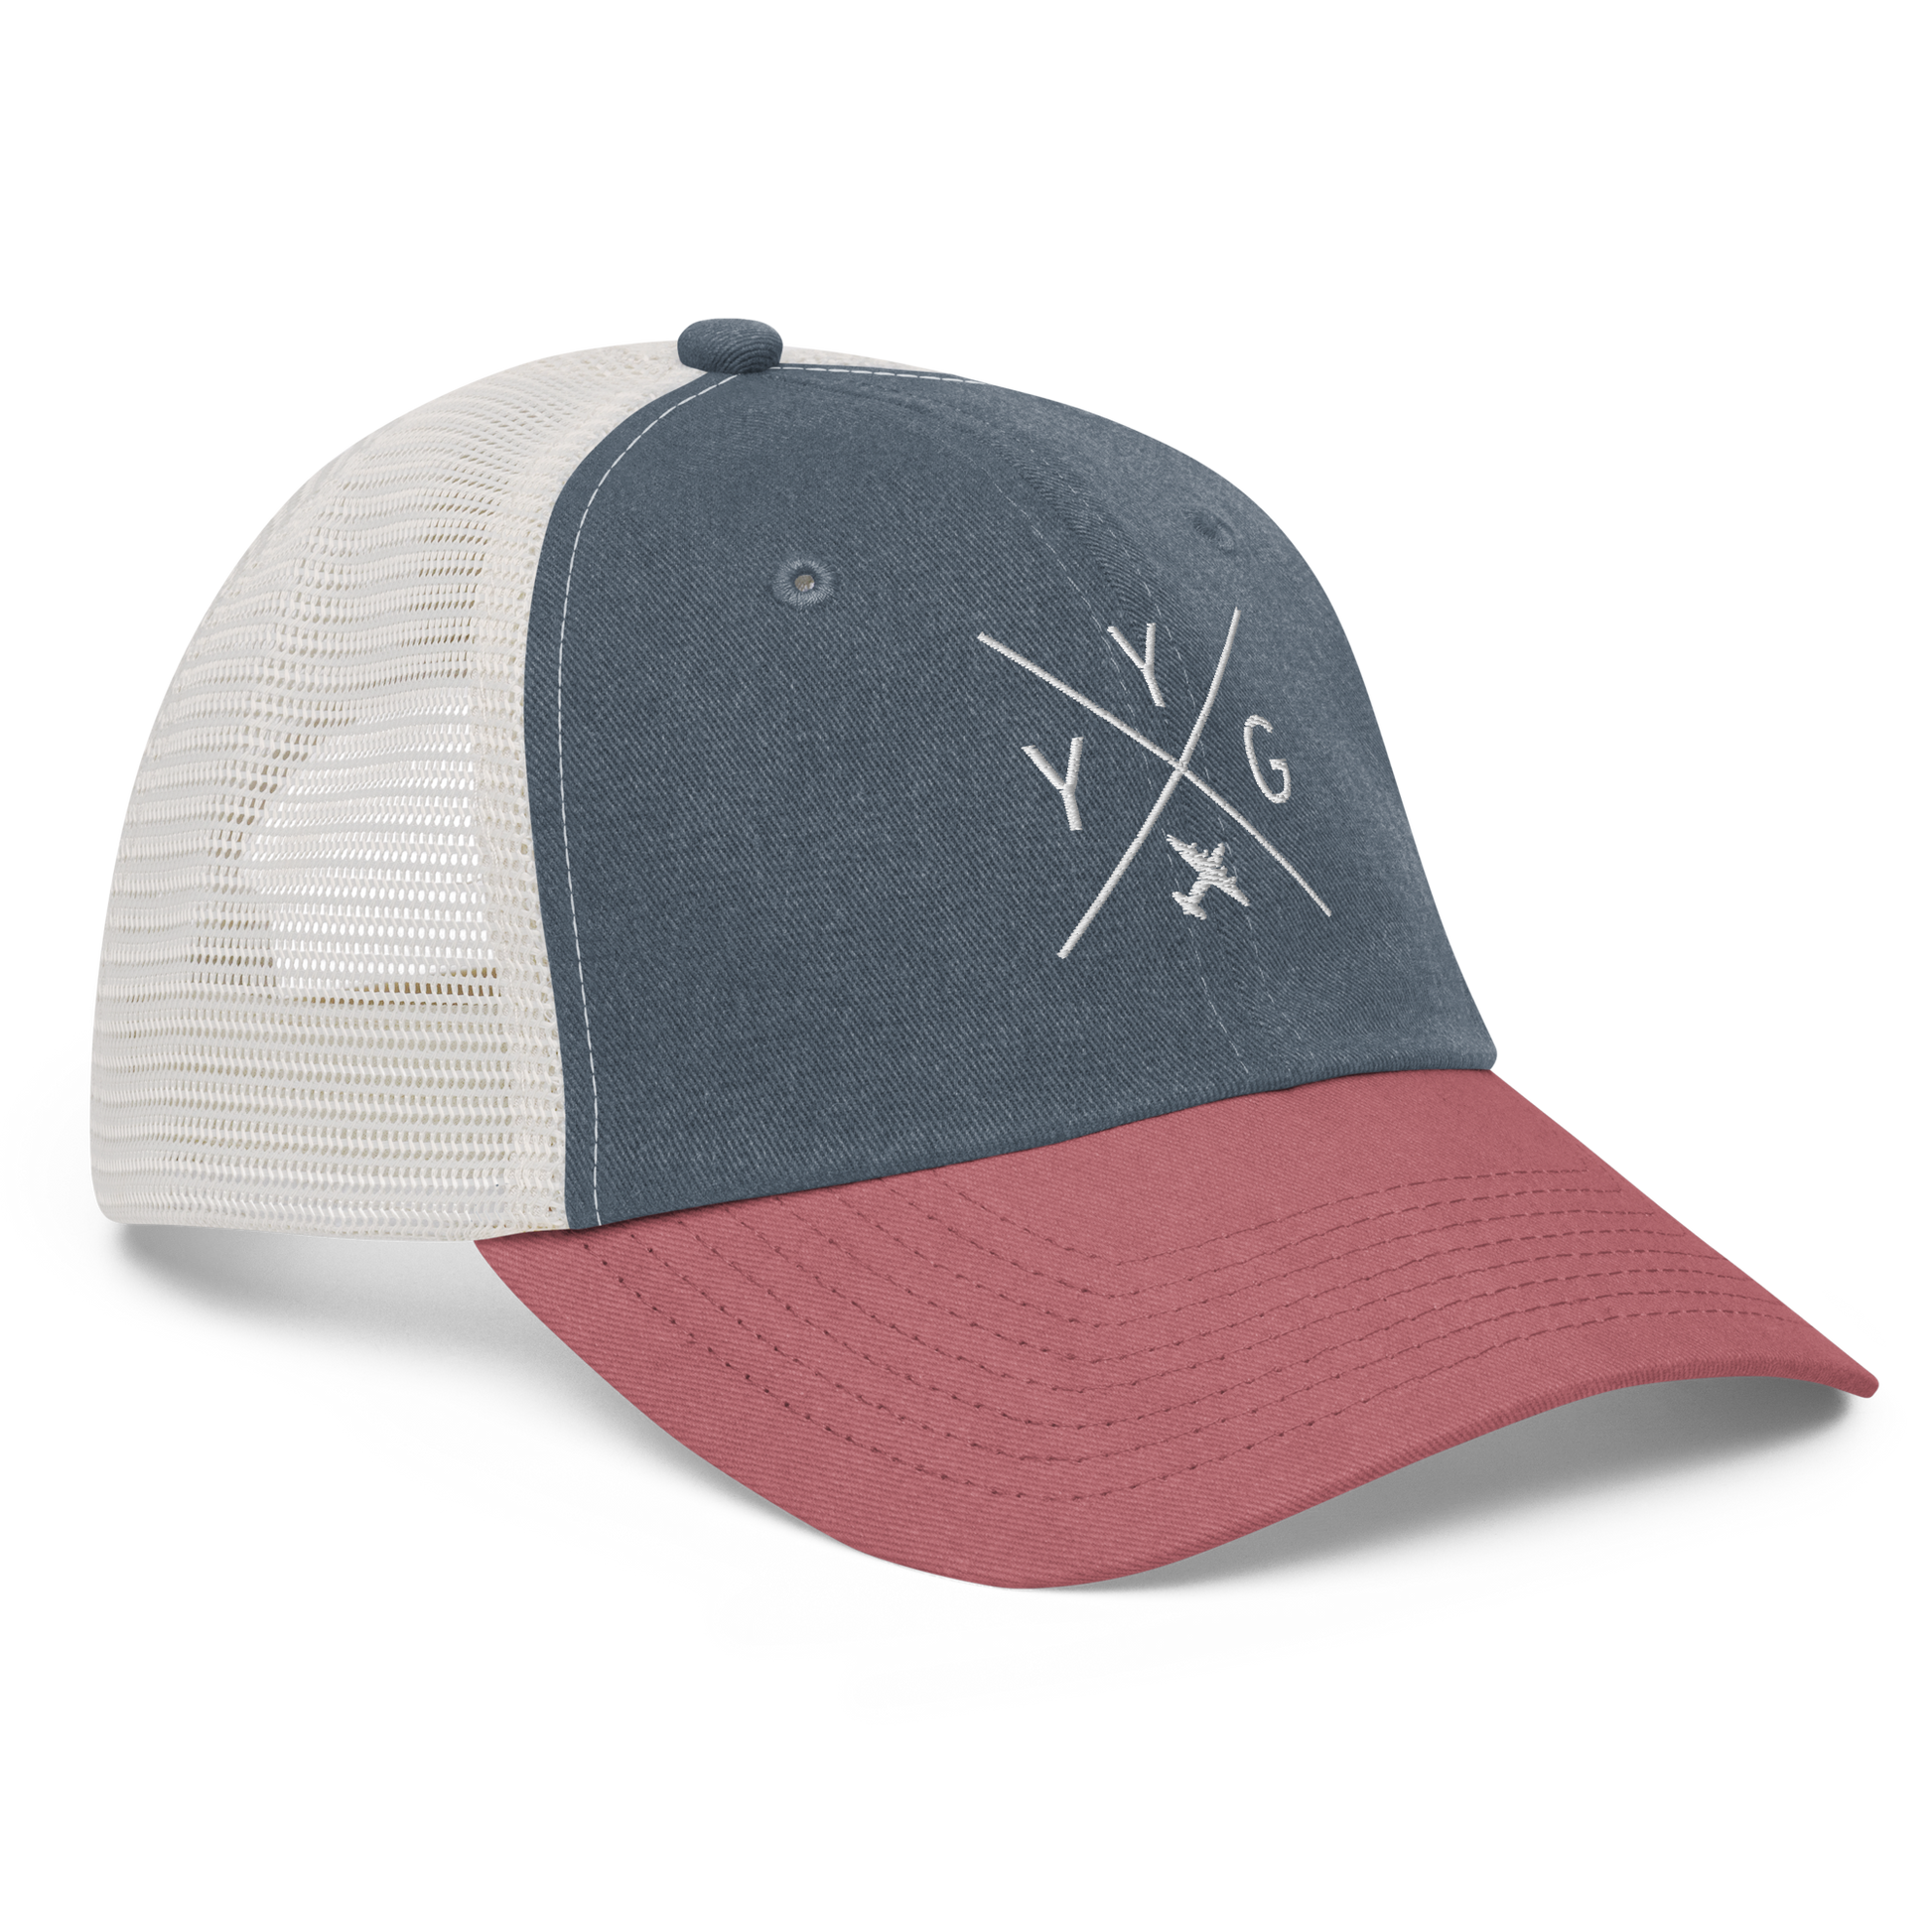 YHM Designs - YYG Charlottetown Pigment-Dyed Trucker Cap - Crossed-X Design with Airport Code and Vintage Propliner - White Embroidery - Image 13